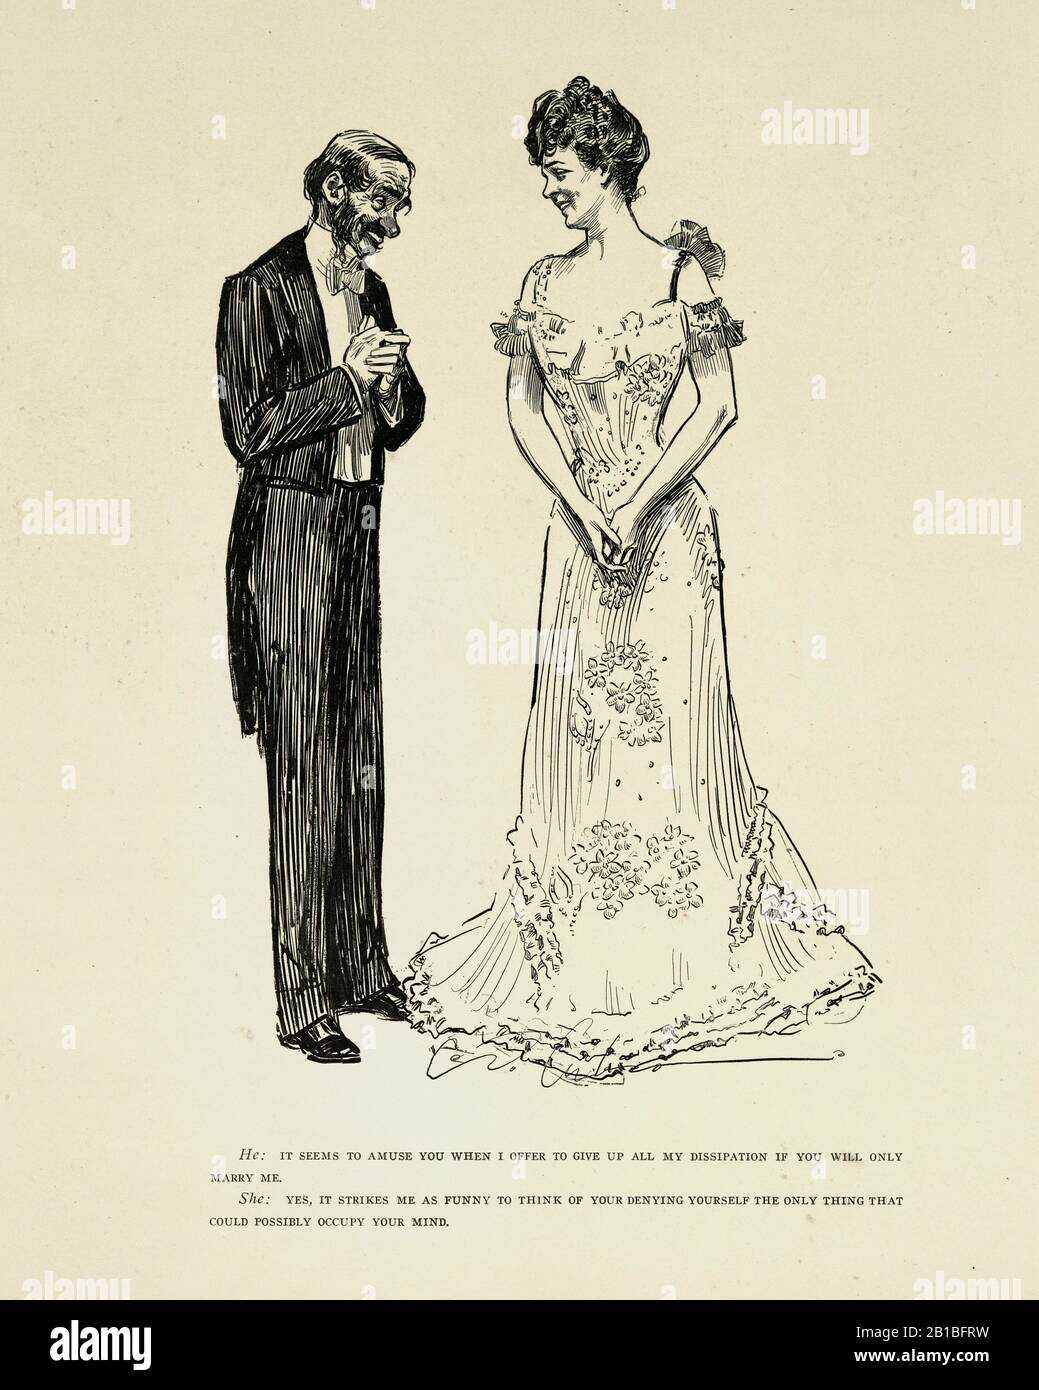 Beauty woman laughting at and rejecting an ugly man. A Widow And Her Friends, Charles Dana Gibson. He: It seems to amuse you when i offer to give up all my dissipation if you will only marry me.  She: Yes, it strikes me as funny to think of your denying yourself the only thing that could possibly occupy your mind. Stock Photo